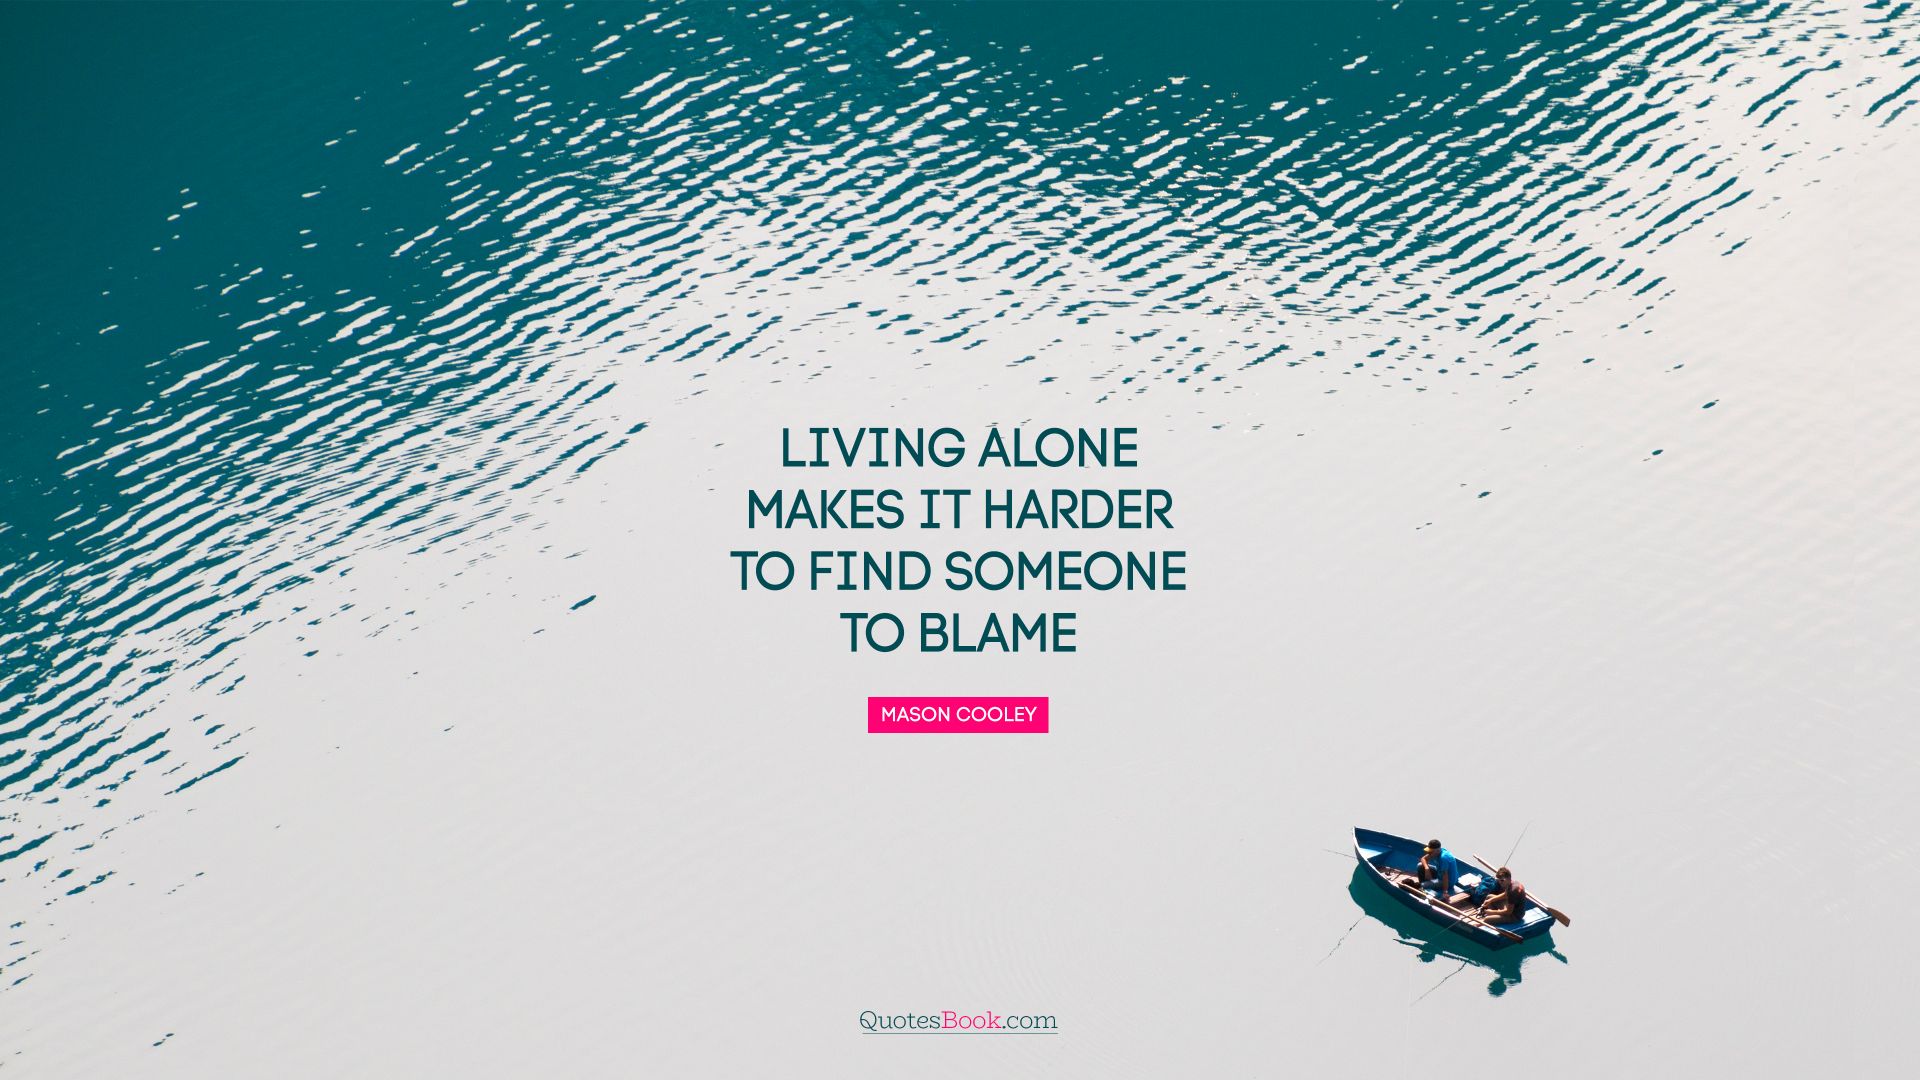 Living alone makes it harder to find someone to blame. - Quote by Mason Cooley